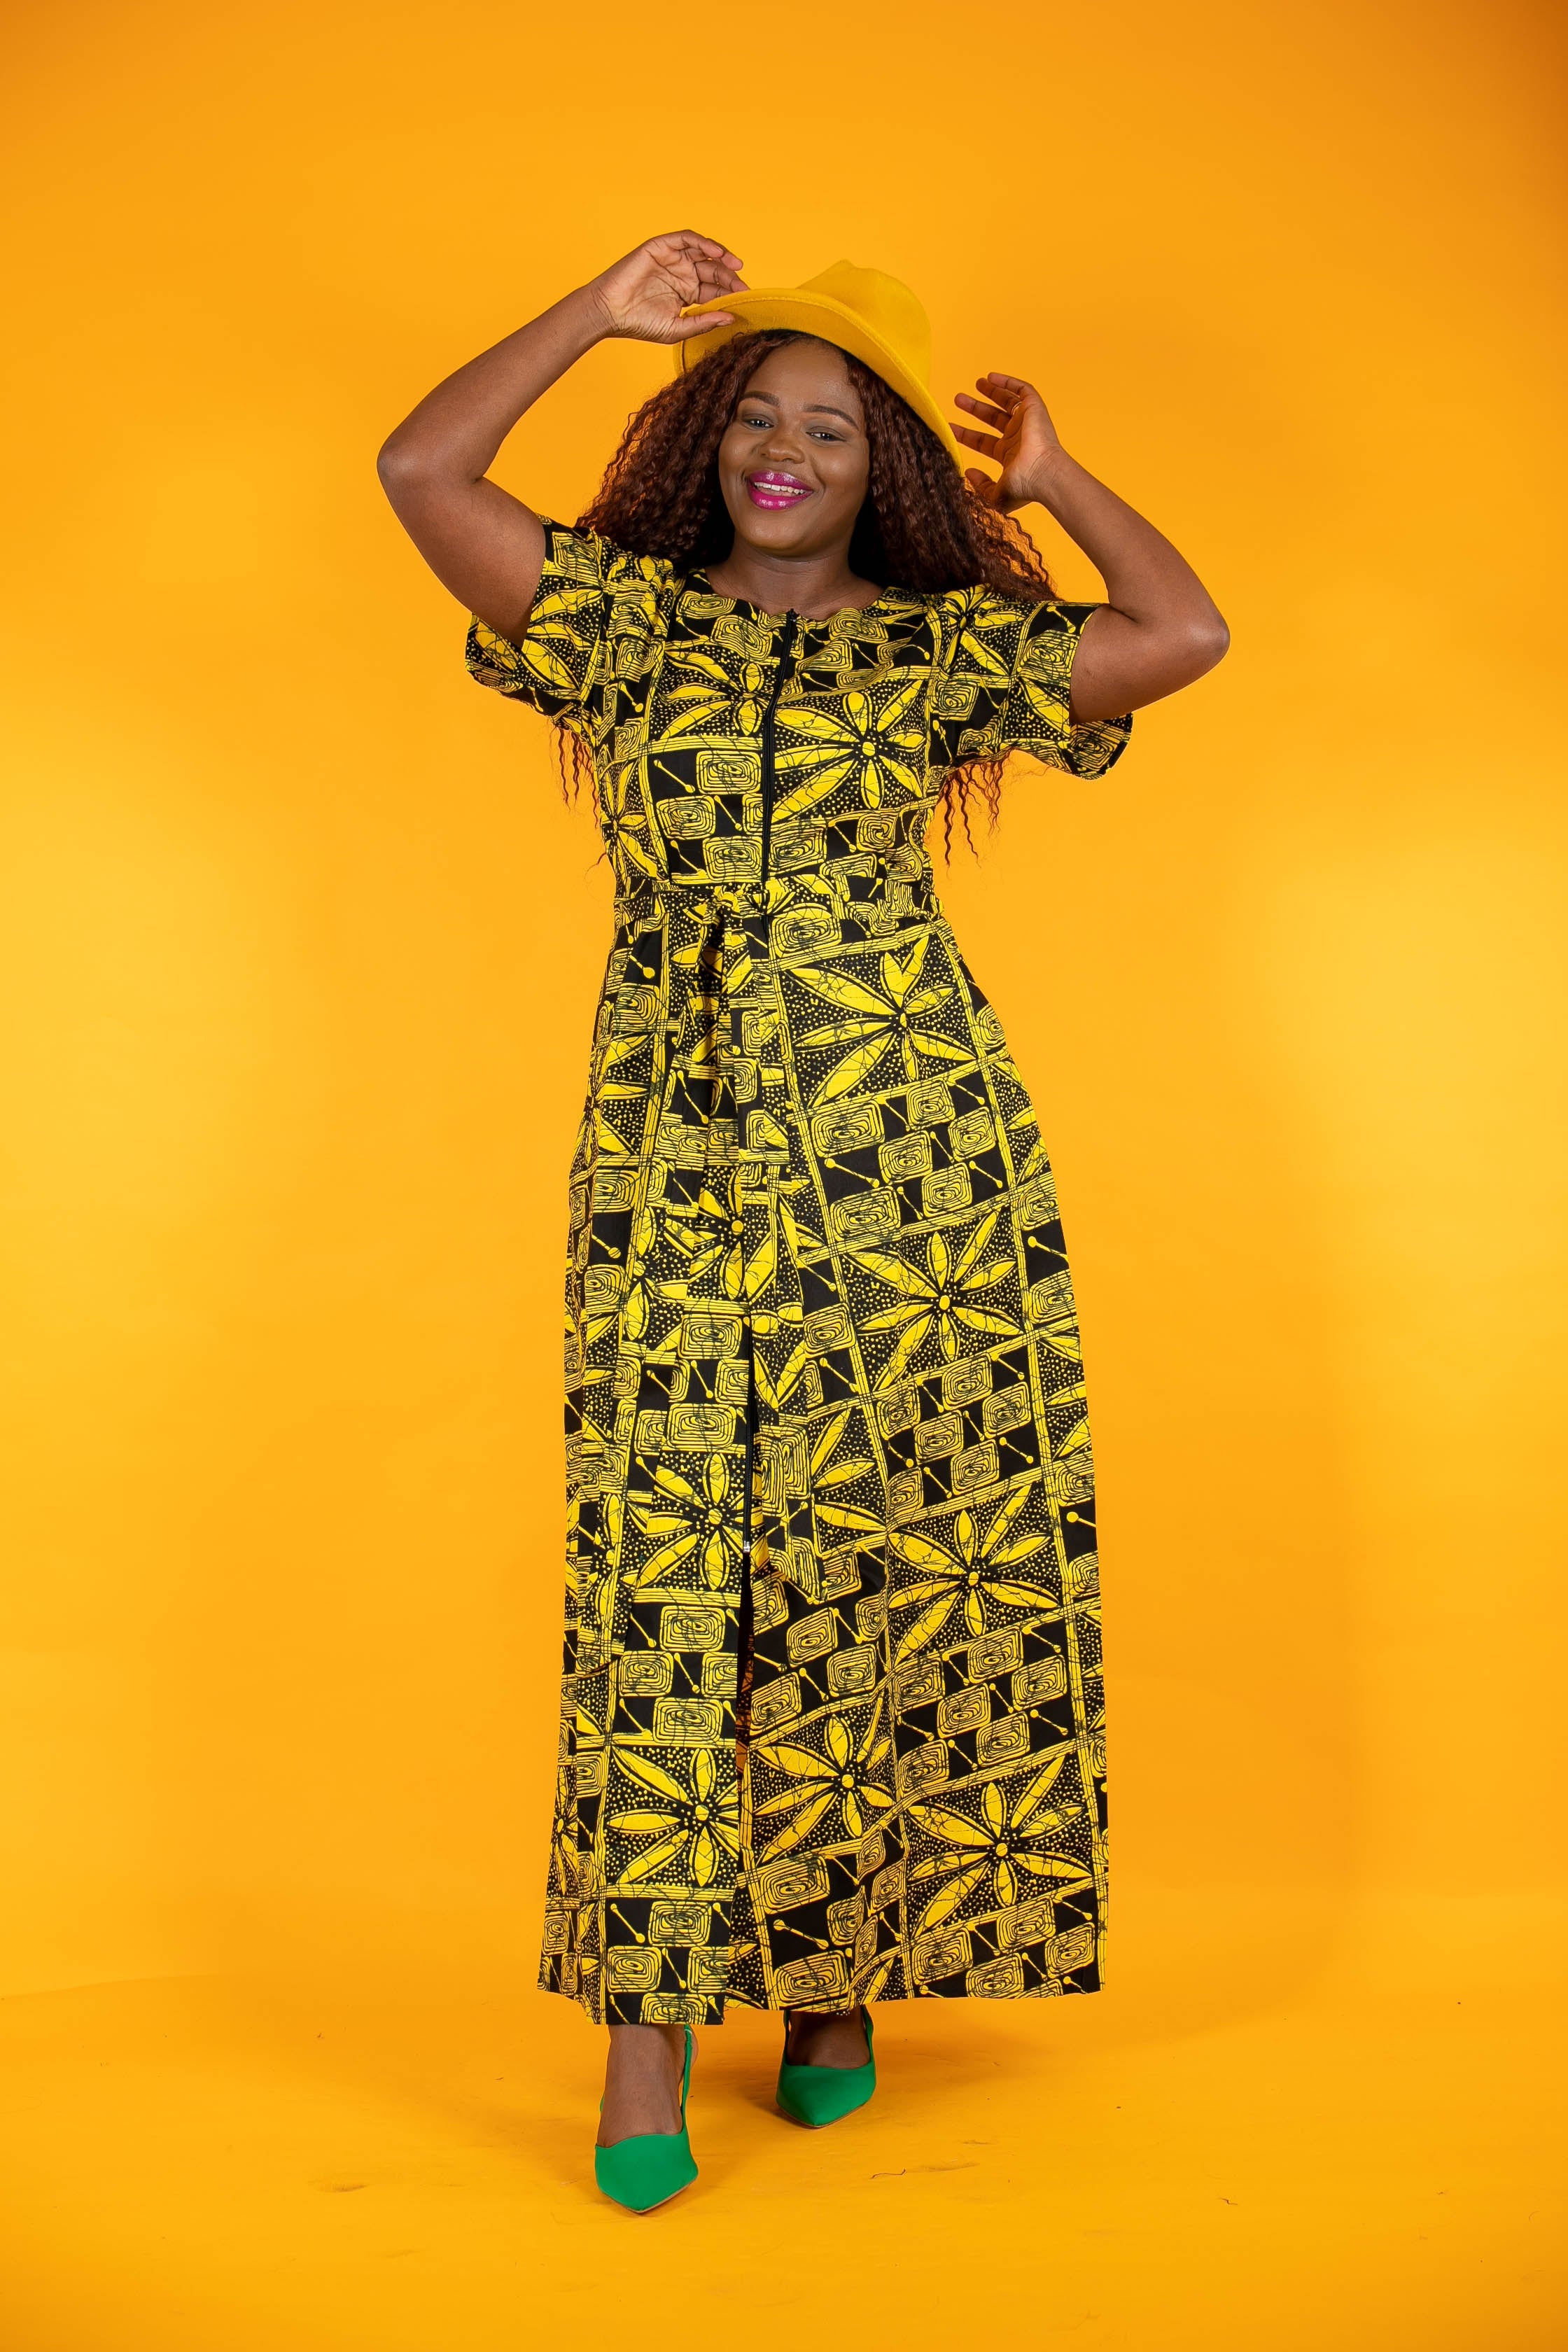 temad collections african print ankara front zip maxi dress with pockets, Stylish African print dresses, Modern African dresses, Ankara dress for ladies, Latest Ankara dresses, Long Ankara dresses, ankara dresses Uk. Ankara dresses styles, stylish Ankara dresses, beautiful African dresses, African Ankara dresses for ladies, African dresses styles, ankara print, ankara maxi dresses,Ankara midi dresses, Ankara short dresses, African maxi dress, , African midi dress, , African short dress 